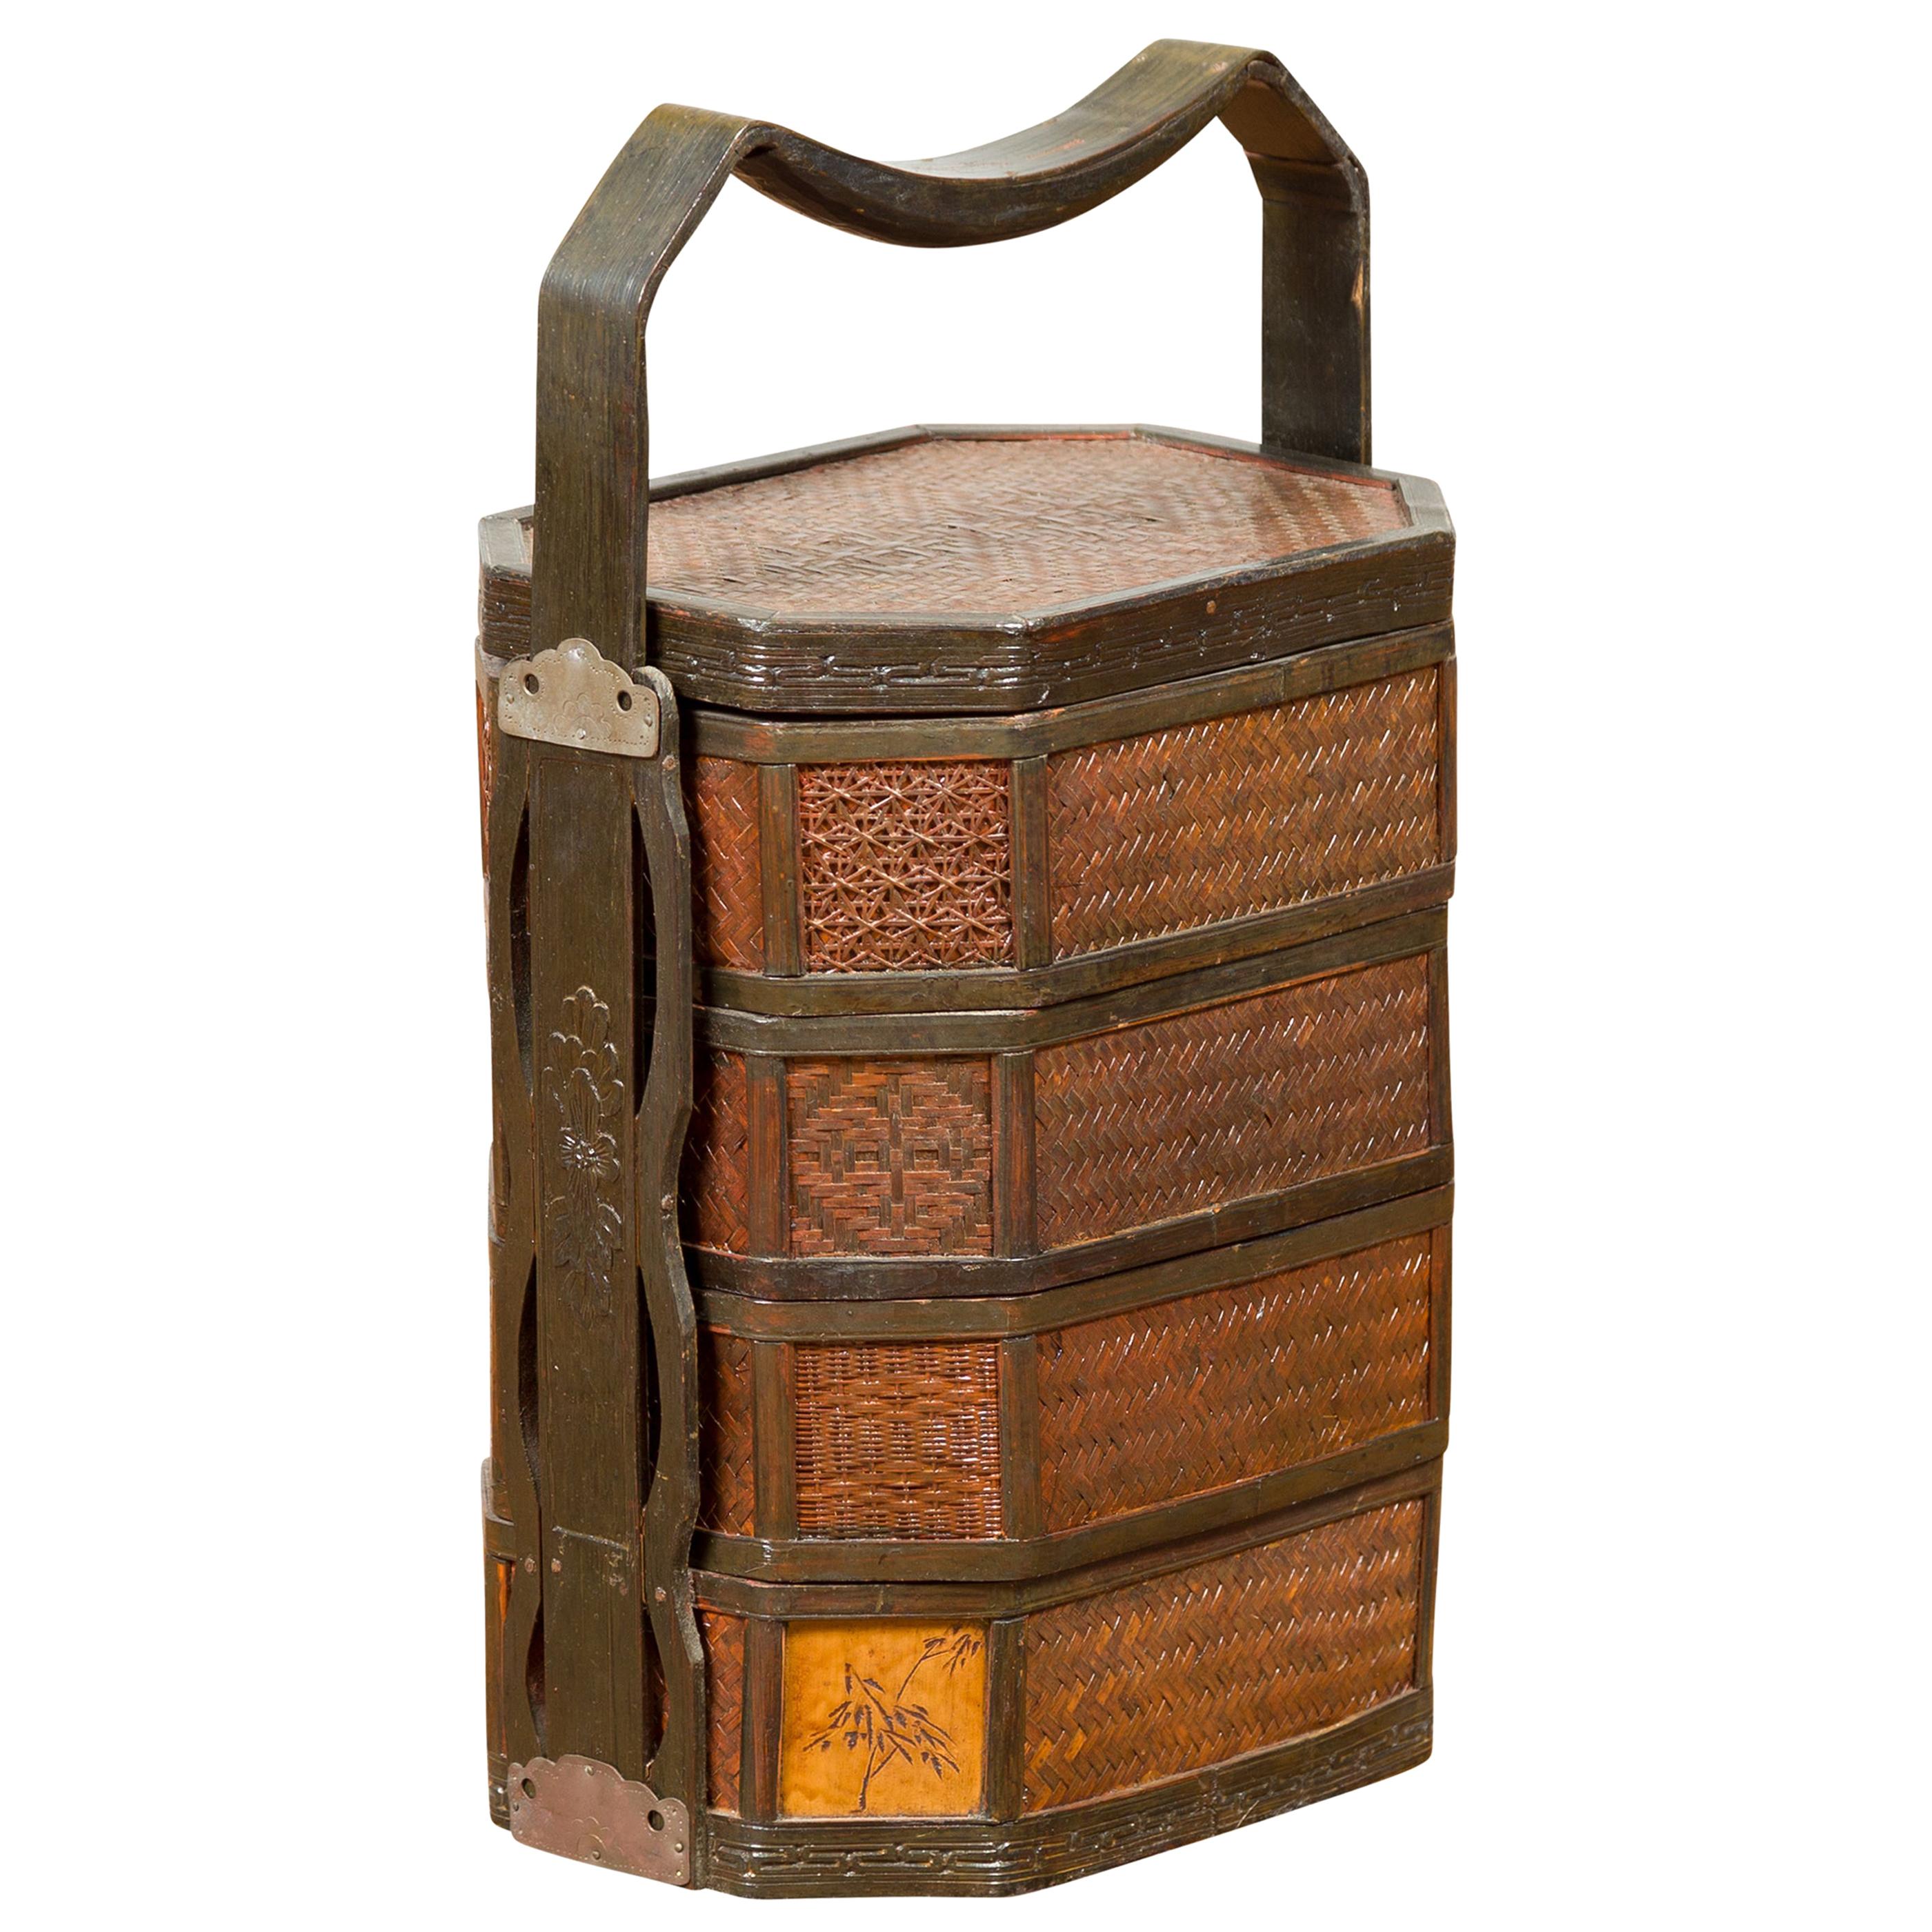 Chinese Antique Stacking Lunch Box with Lacquered Accents and Handle